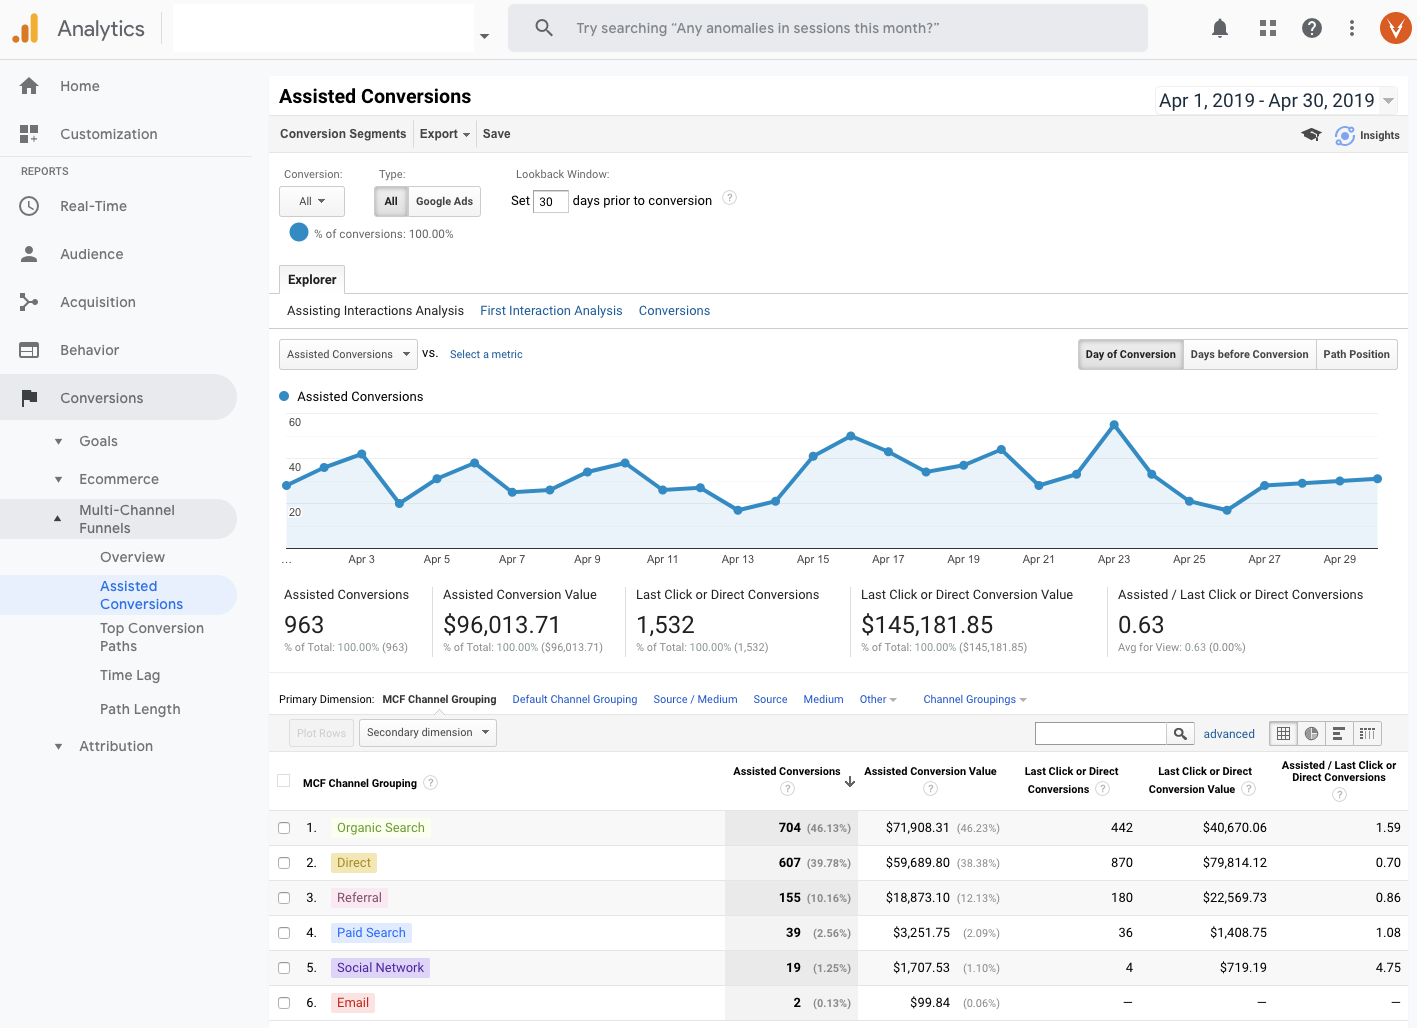 Multi-channel funnels assisted conversions